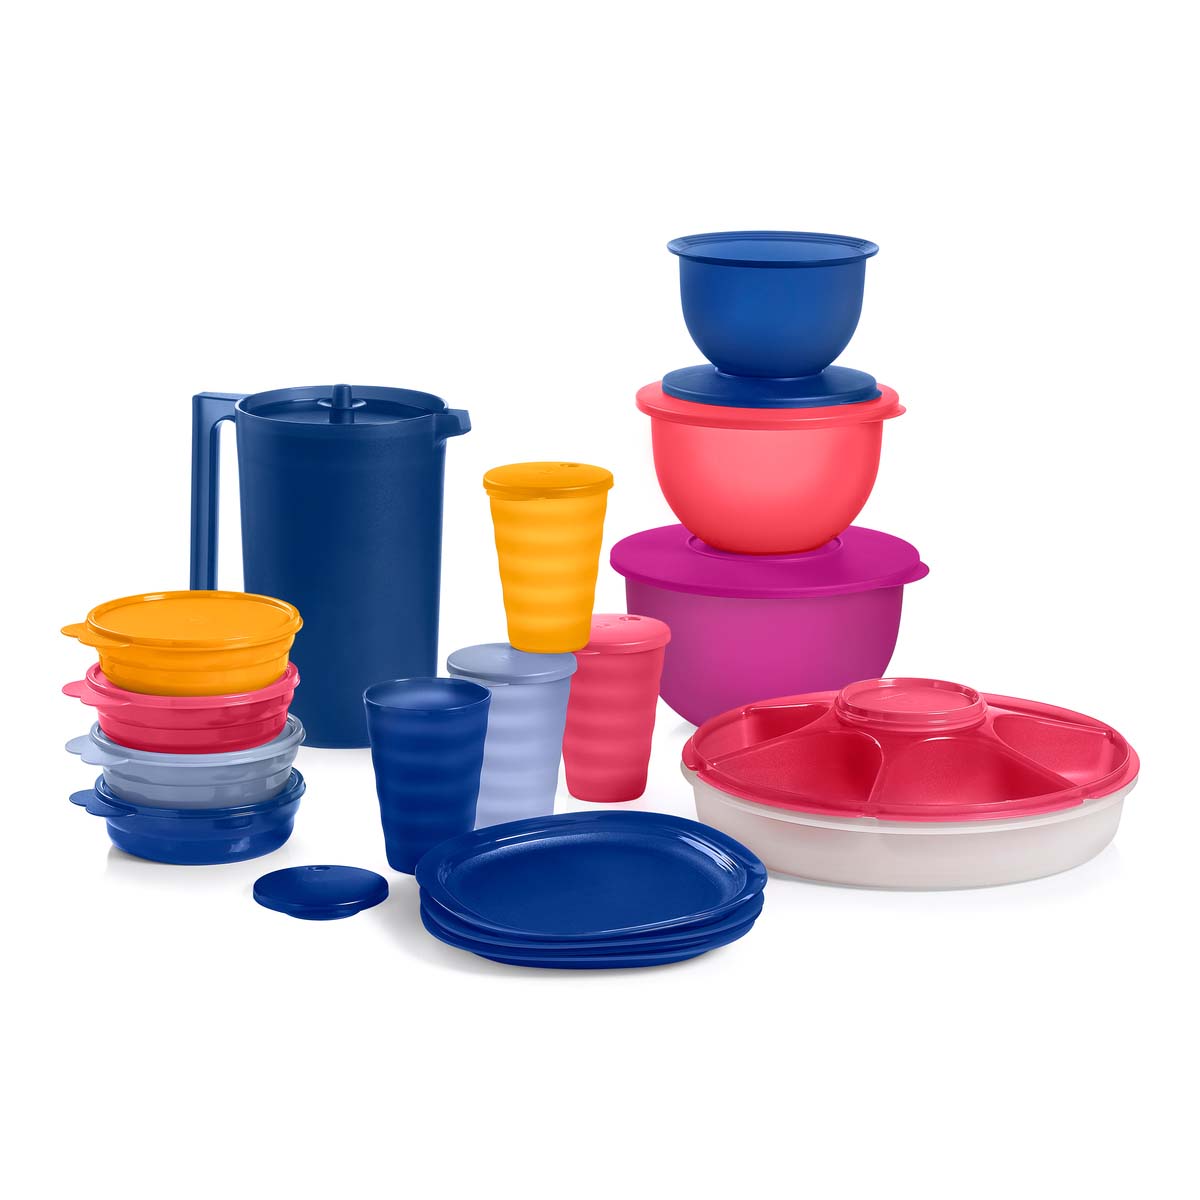 Tupperware® Impressions 17-Pc. Collection